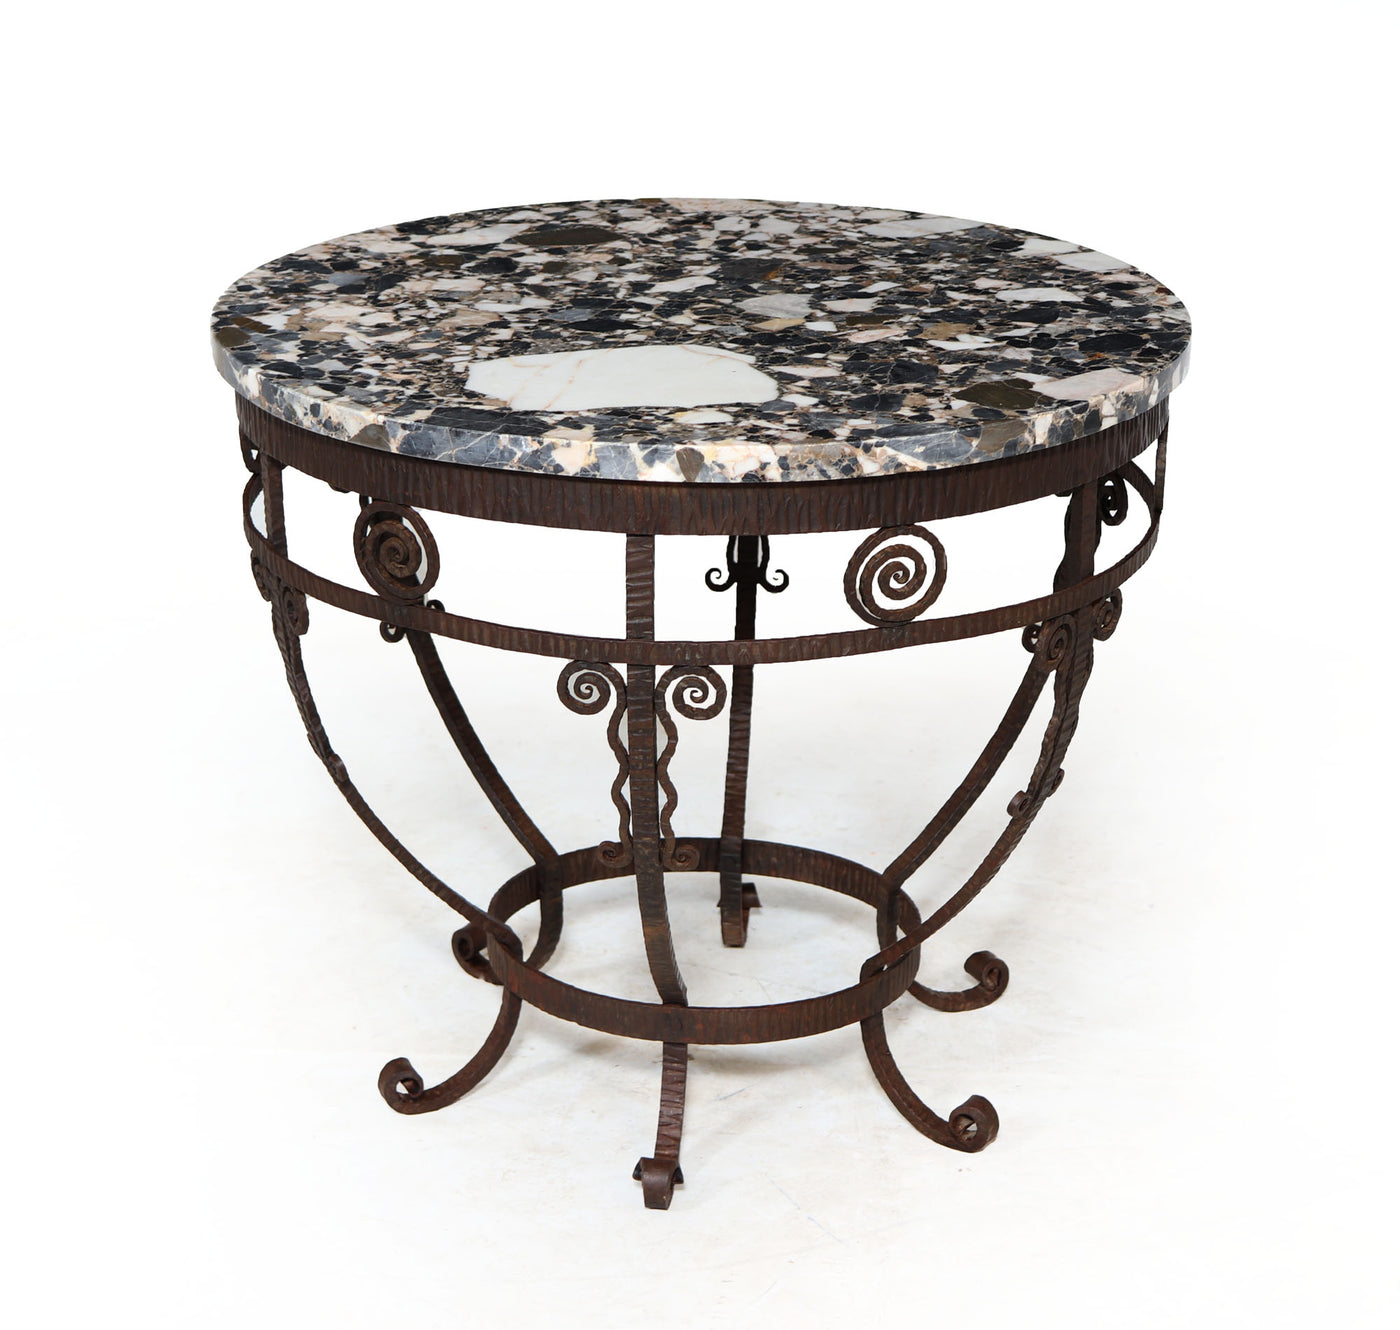 French Art Deco Wrought Iron and marble Coffee Table